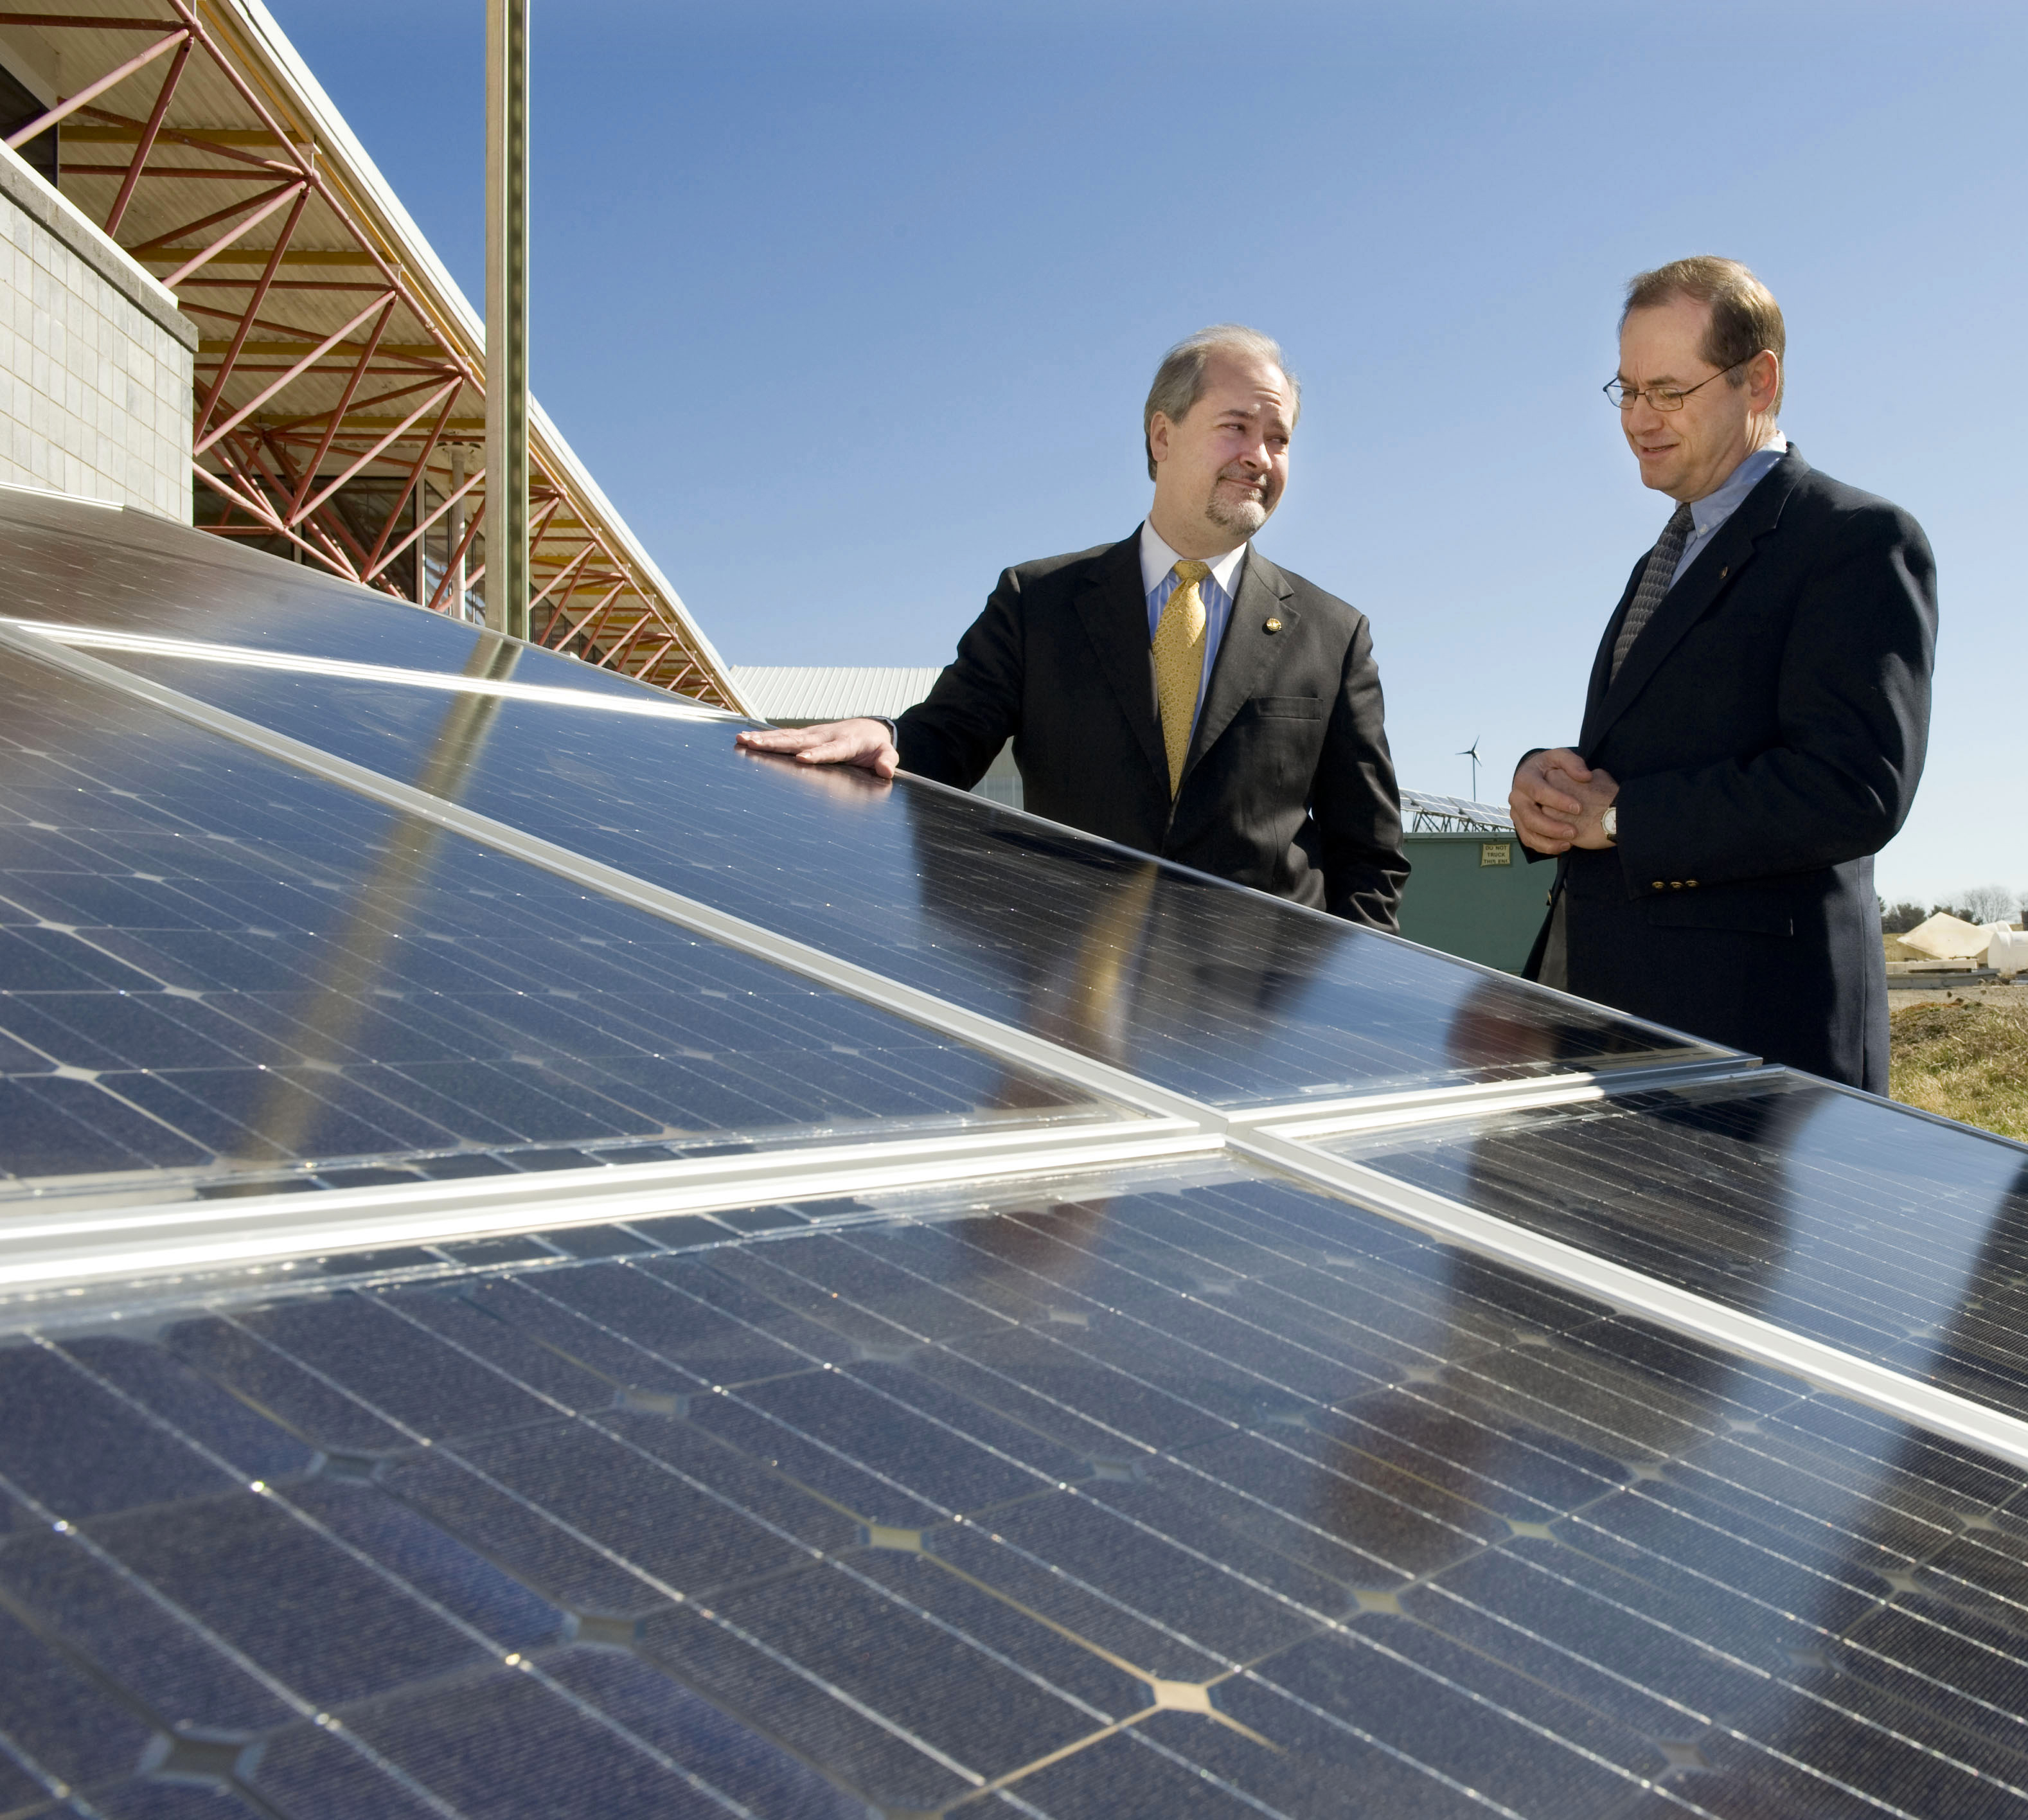 Virginia Secretary of Natural Resources Preston Bryant (left) and College of Architecture and Urban Studies Associate Dean of Research Robert Schubert with the solar panels that will soon be installed on the roof of the solar house Virginia Tech is designing and constructing for the U.S. Department of Energy Solar Decathlon.